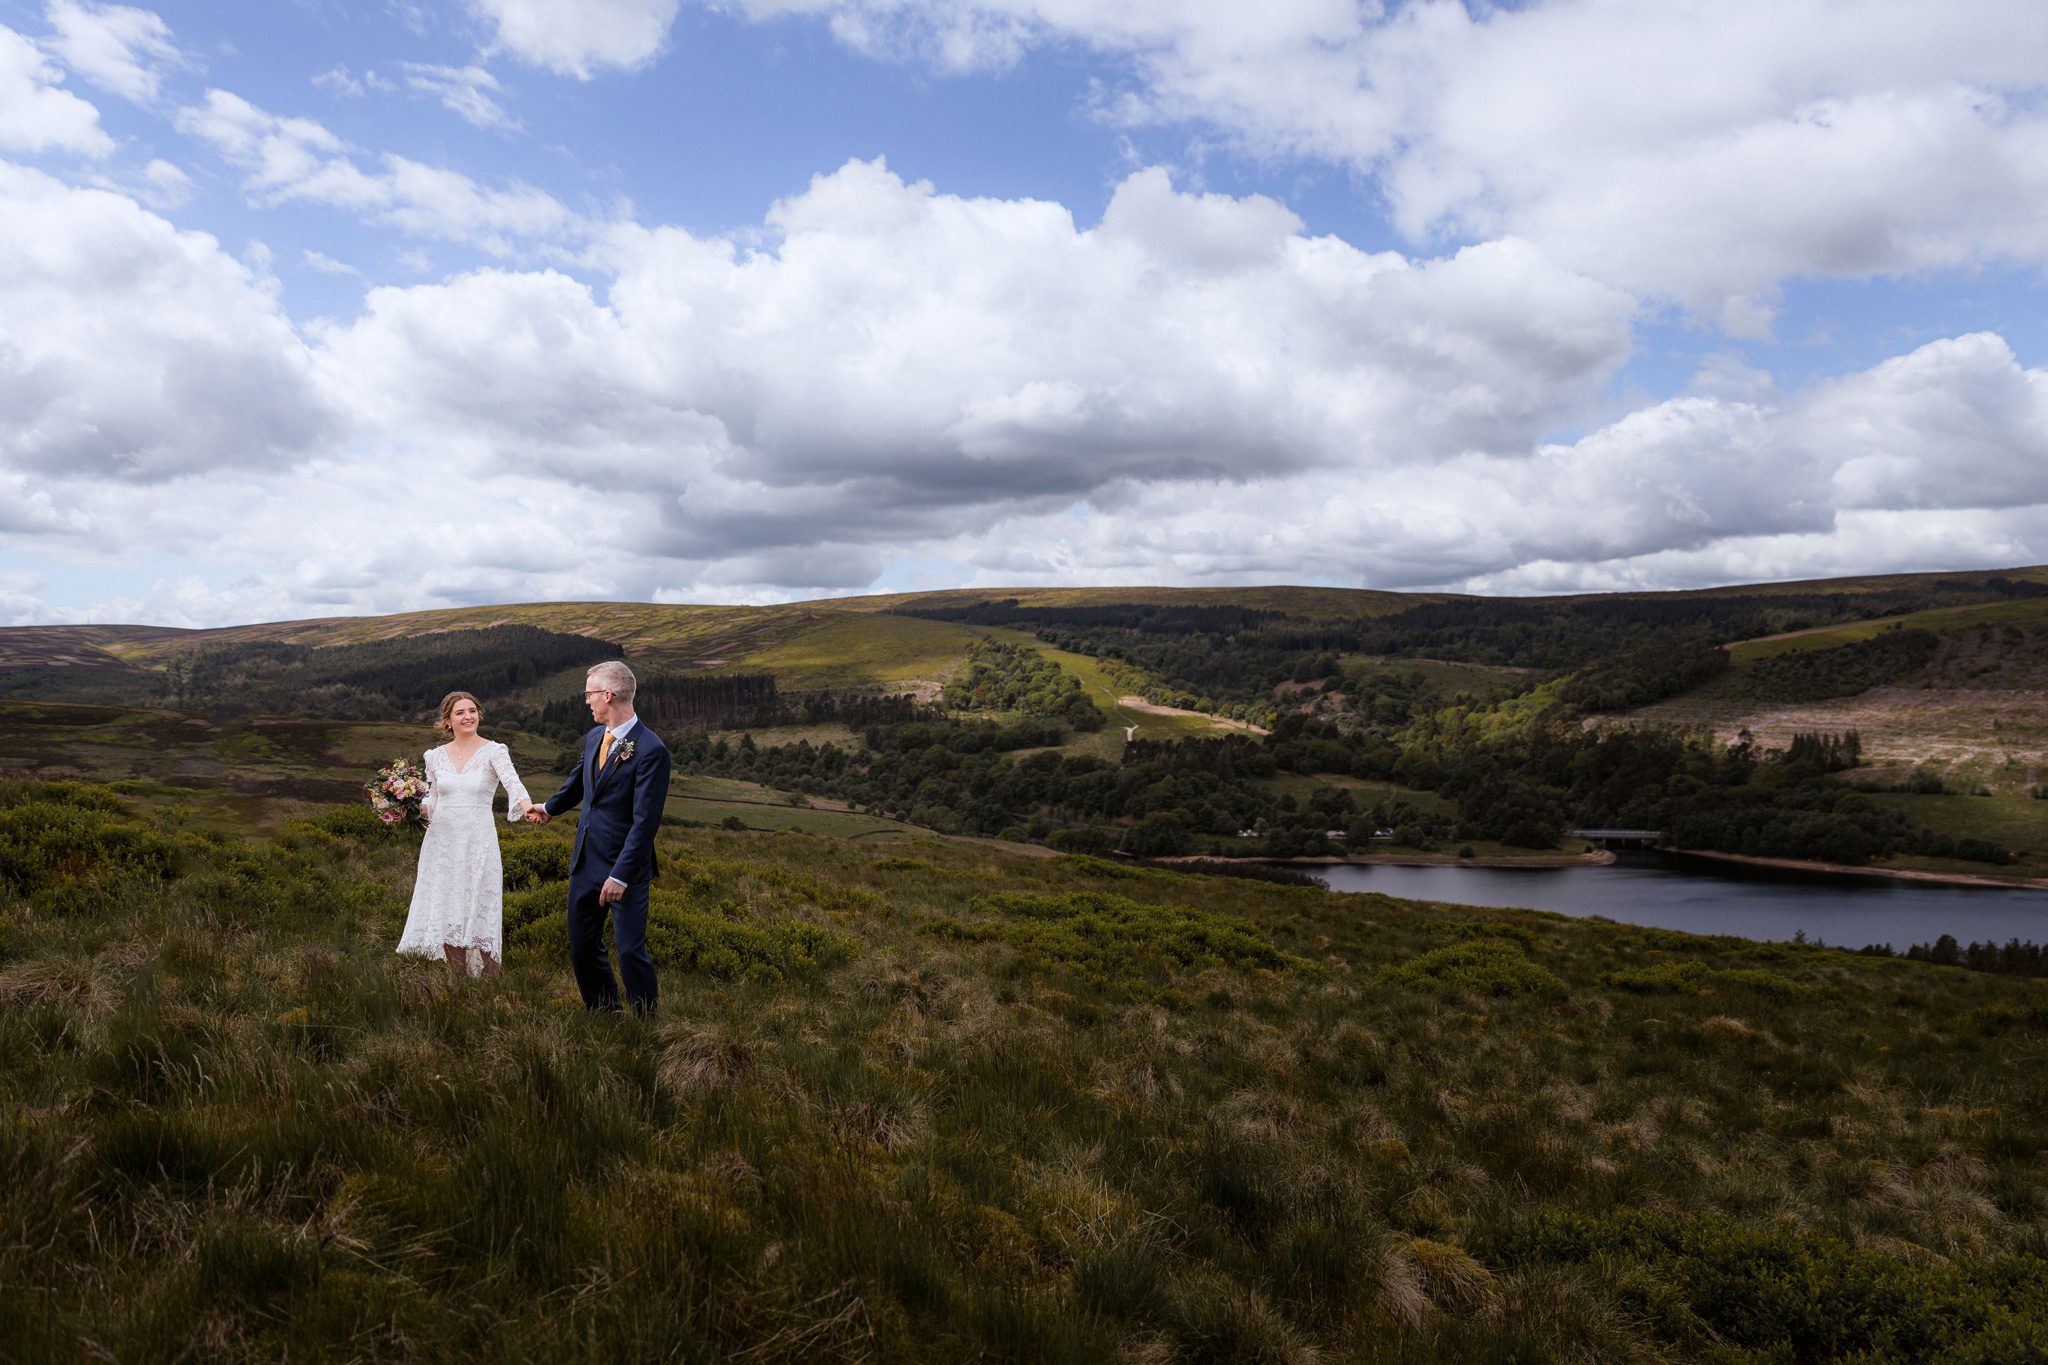 Couple Walking in The Peak District With Views